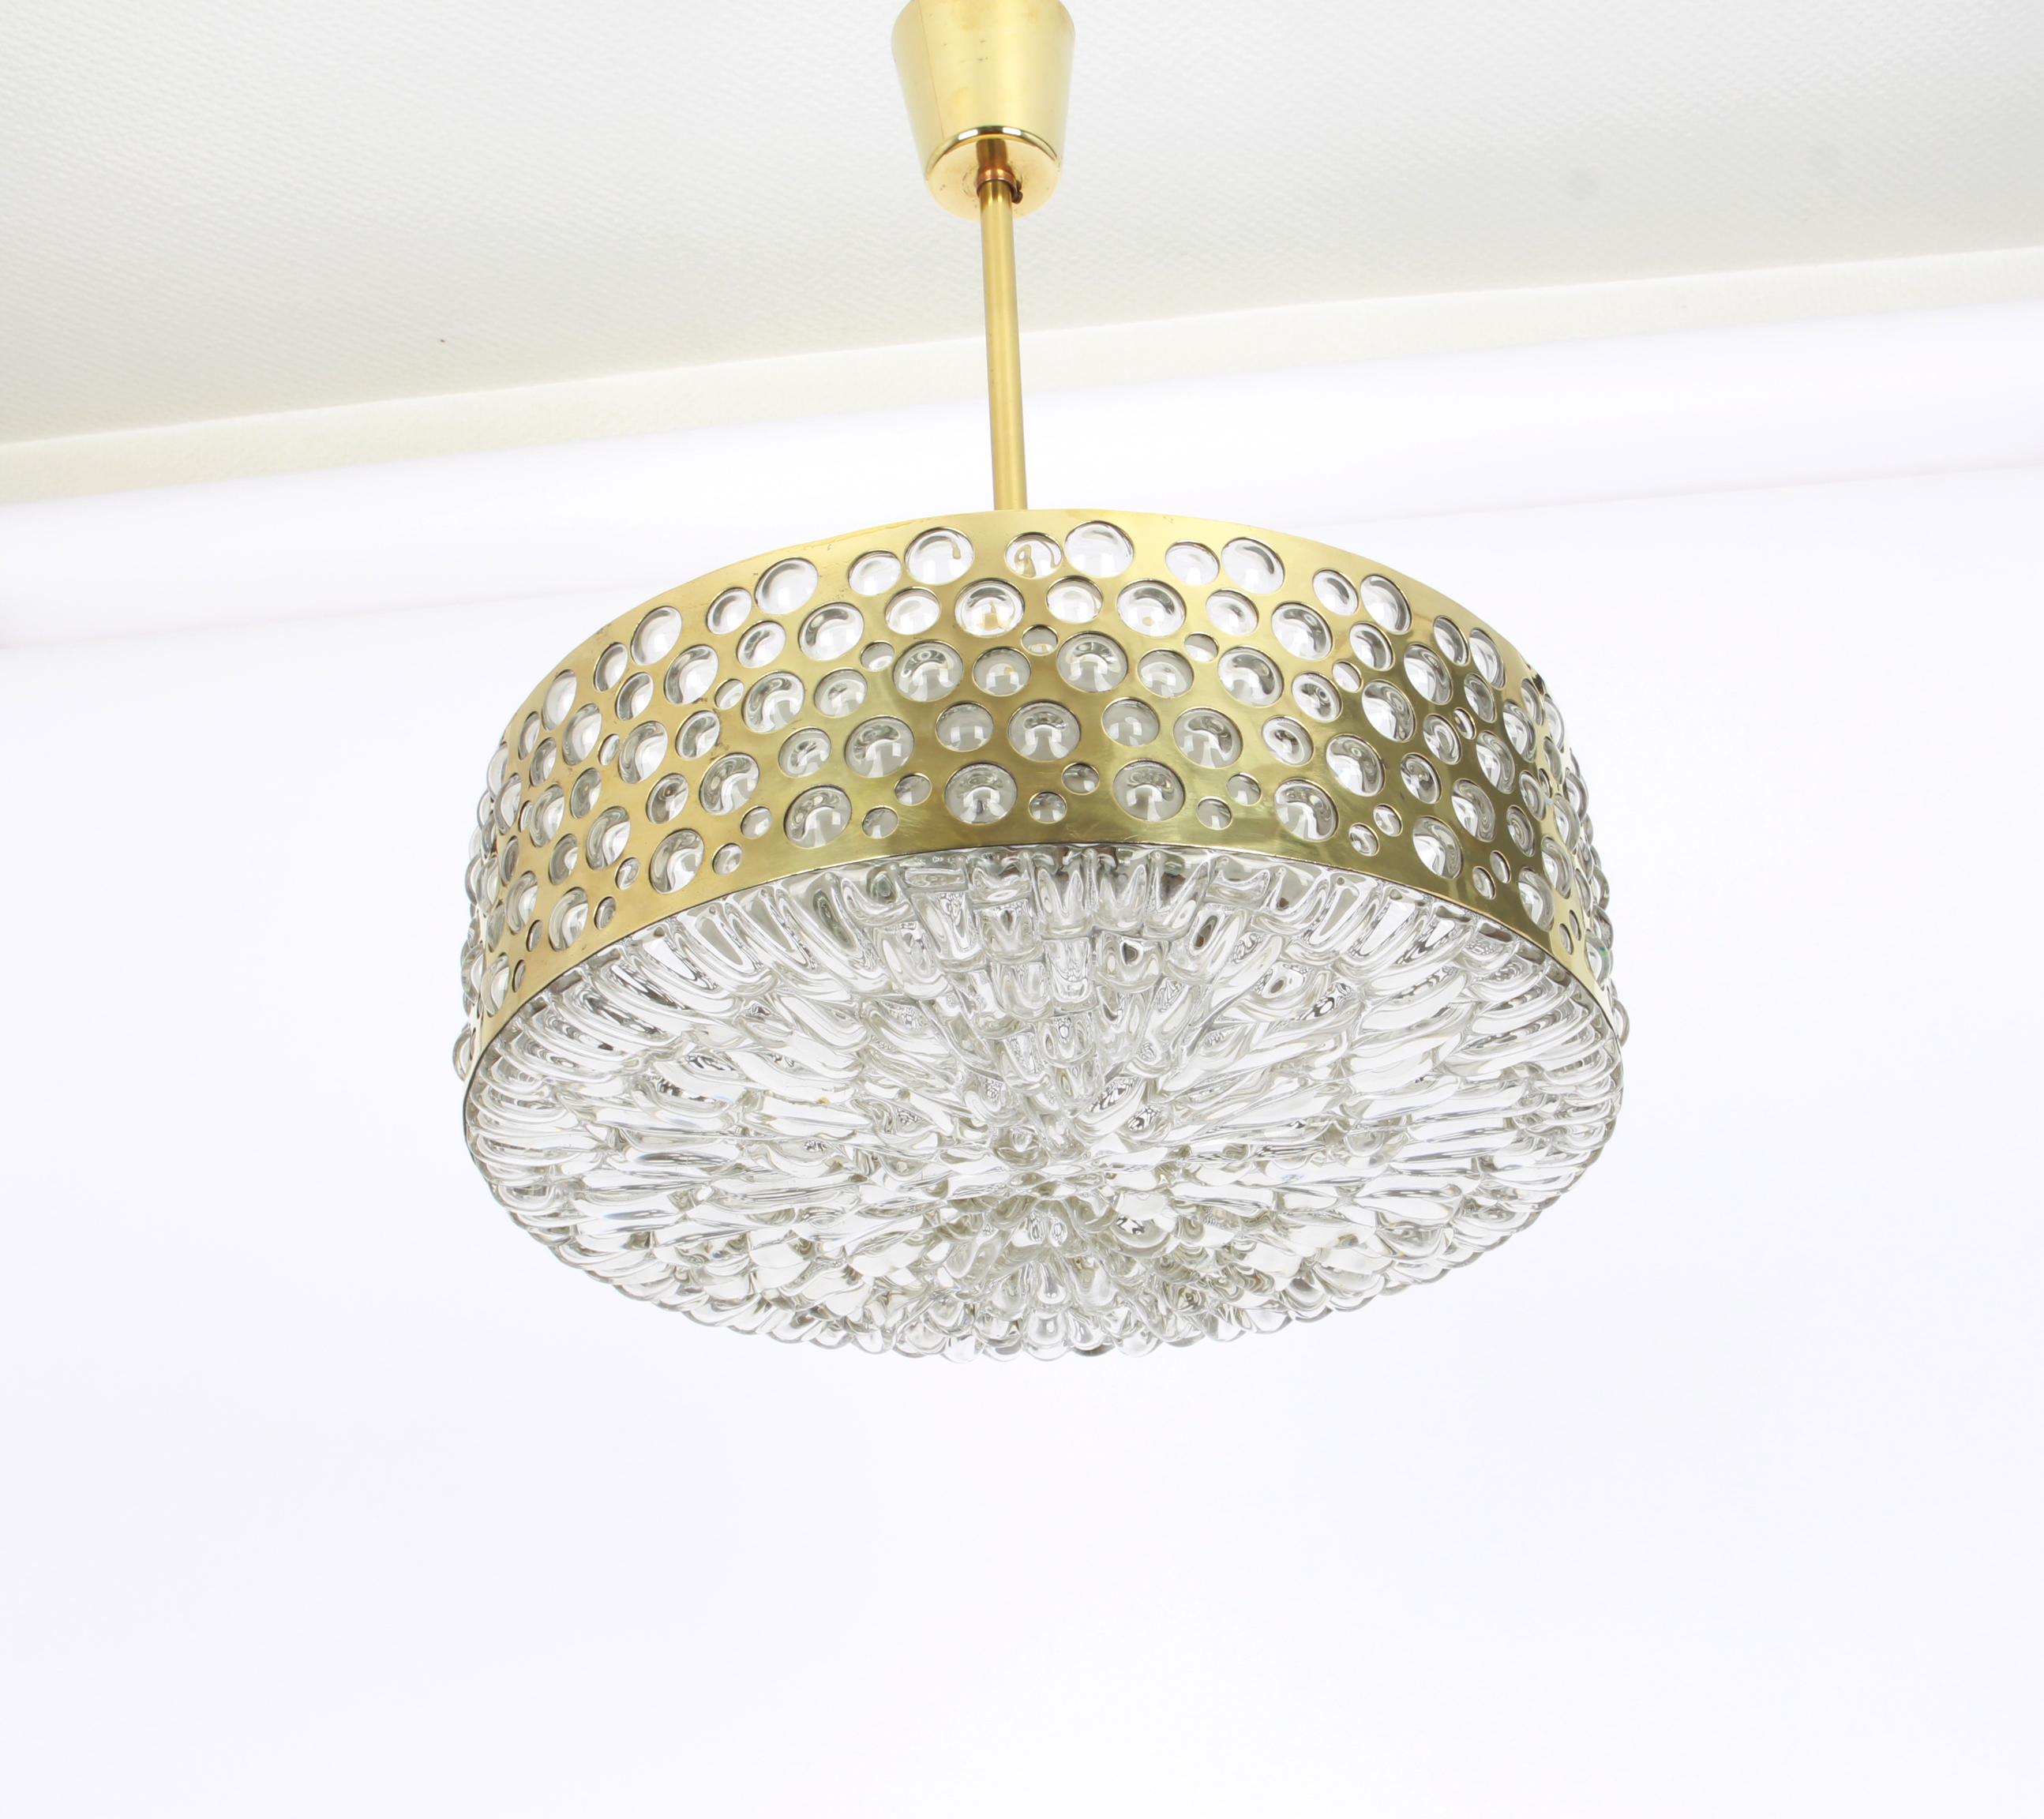 Mid-Century Modern Large Pendant Light with Aged Brass Glass by Rupert Nikoll, Austria, 1960s For Sale